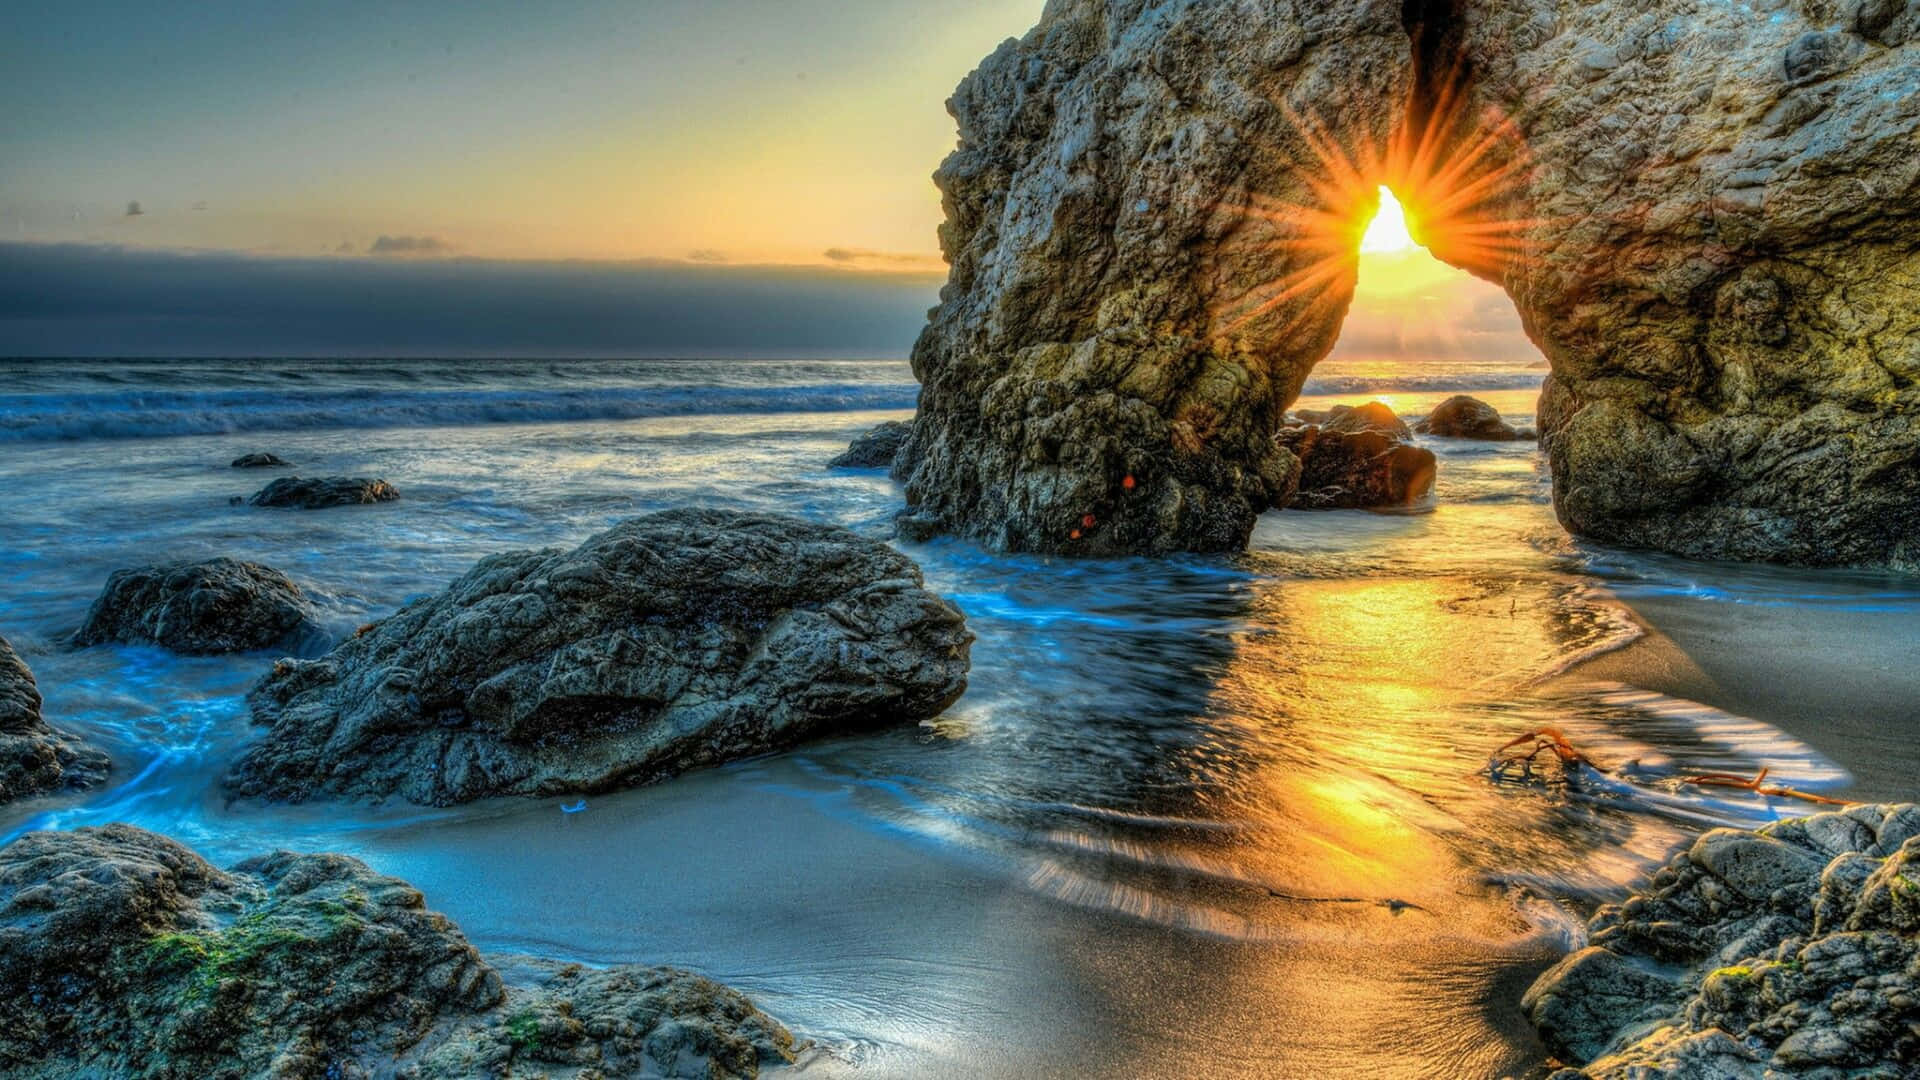 A Rock Arch In The Ocean At Sunset Wallpaper